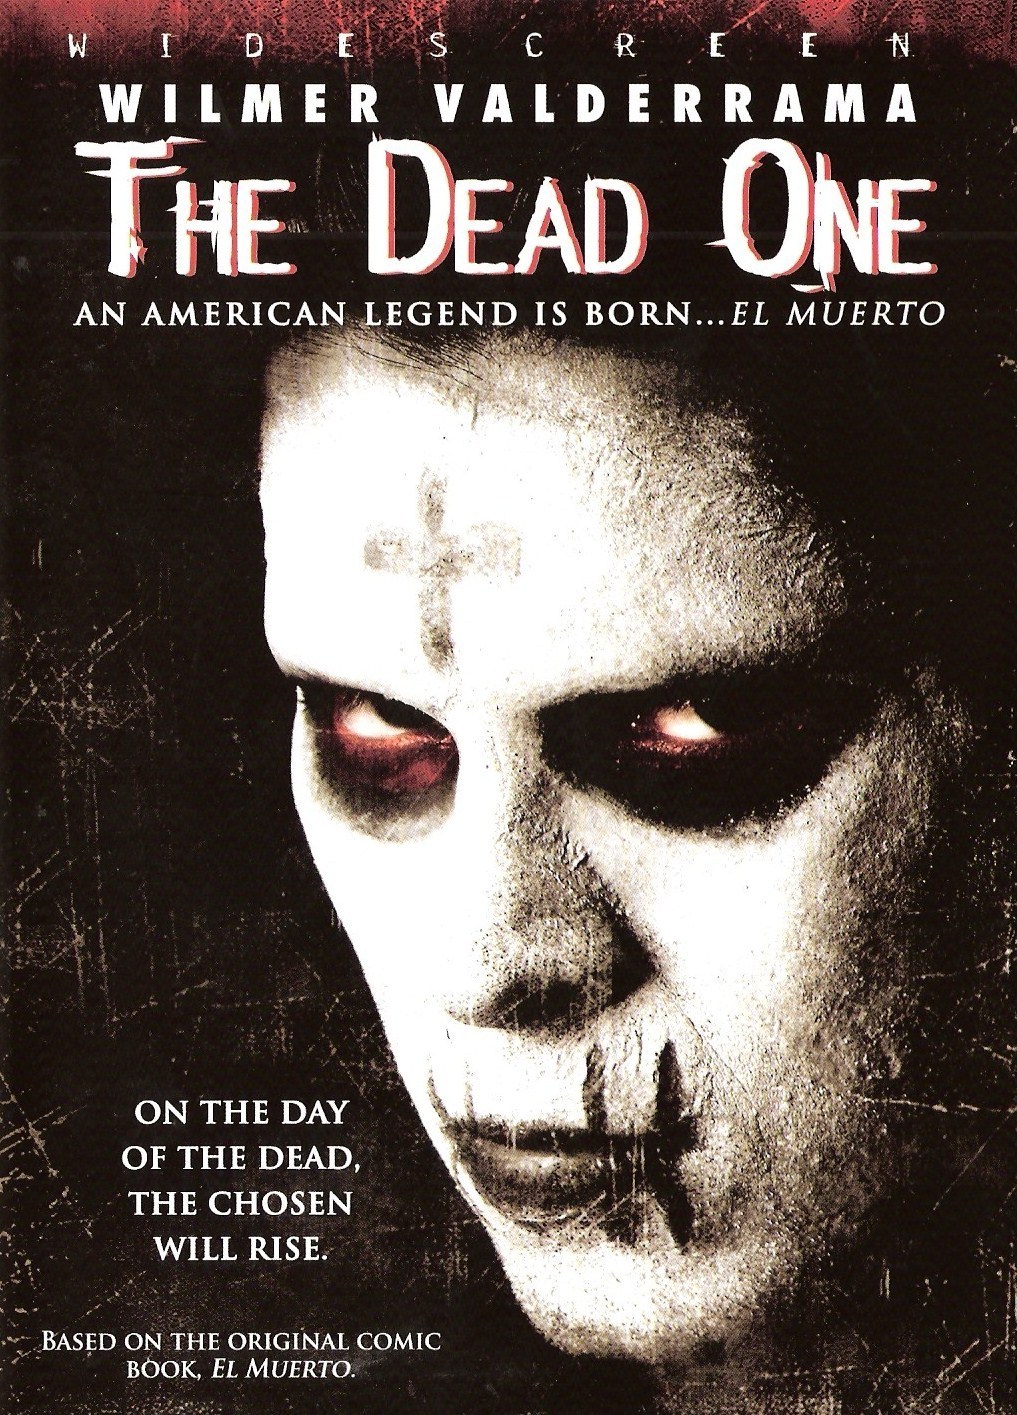 Poster for the movie "The Dead One"